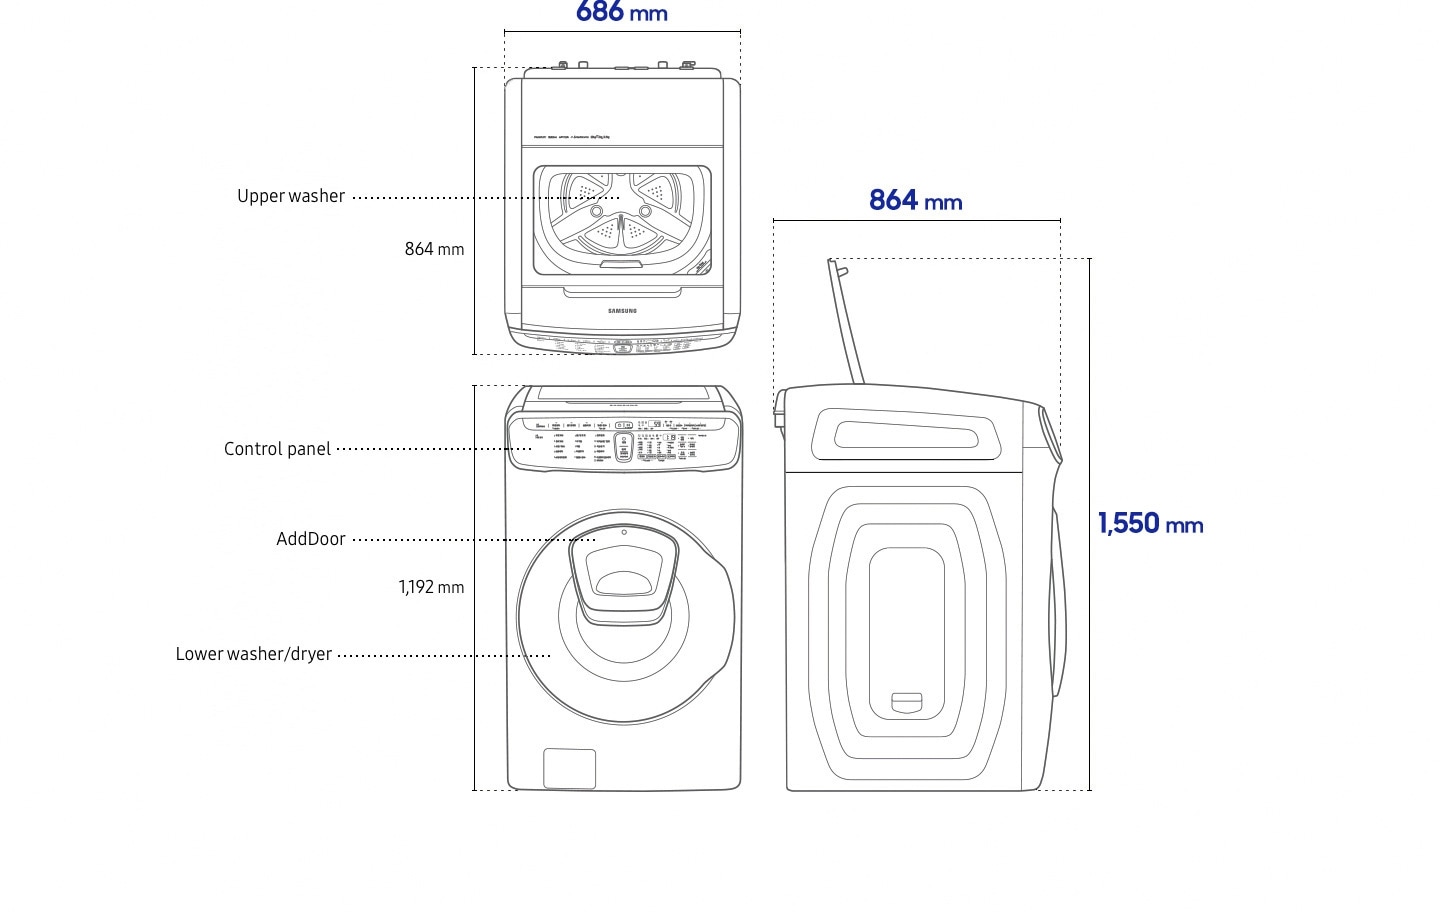 Dimensions of Samsung 21 Kg Front Load Washing Machine